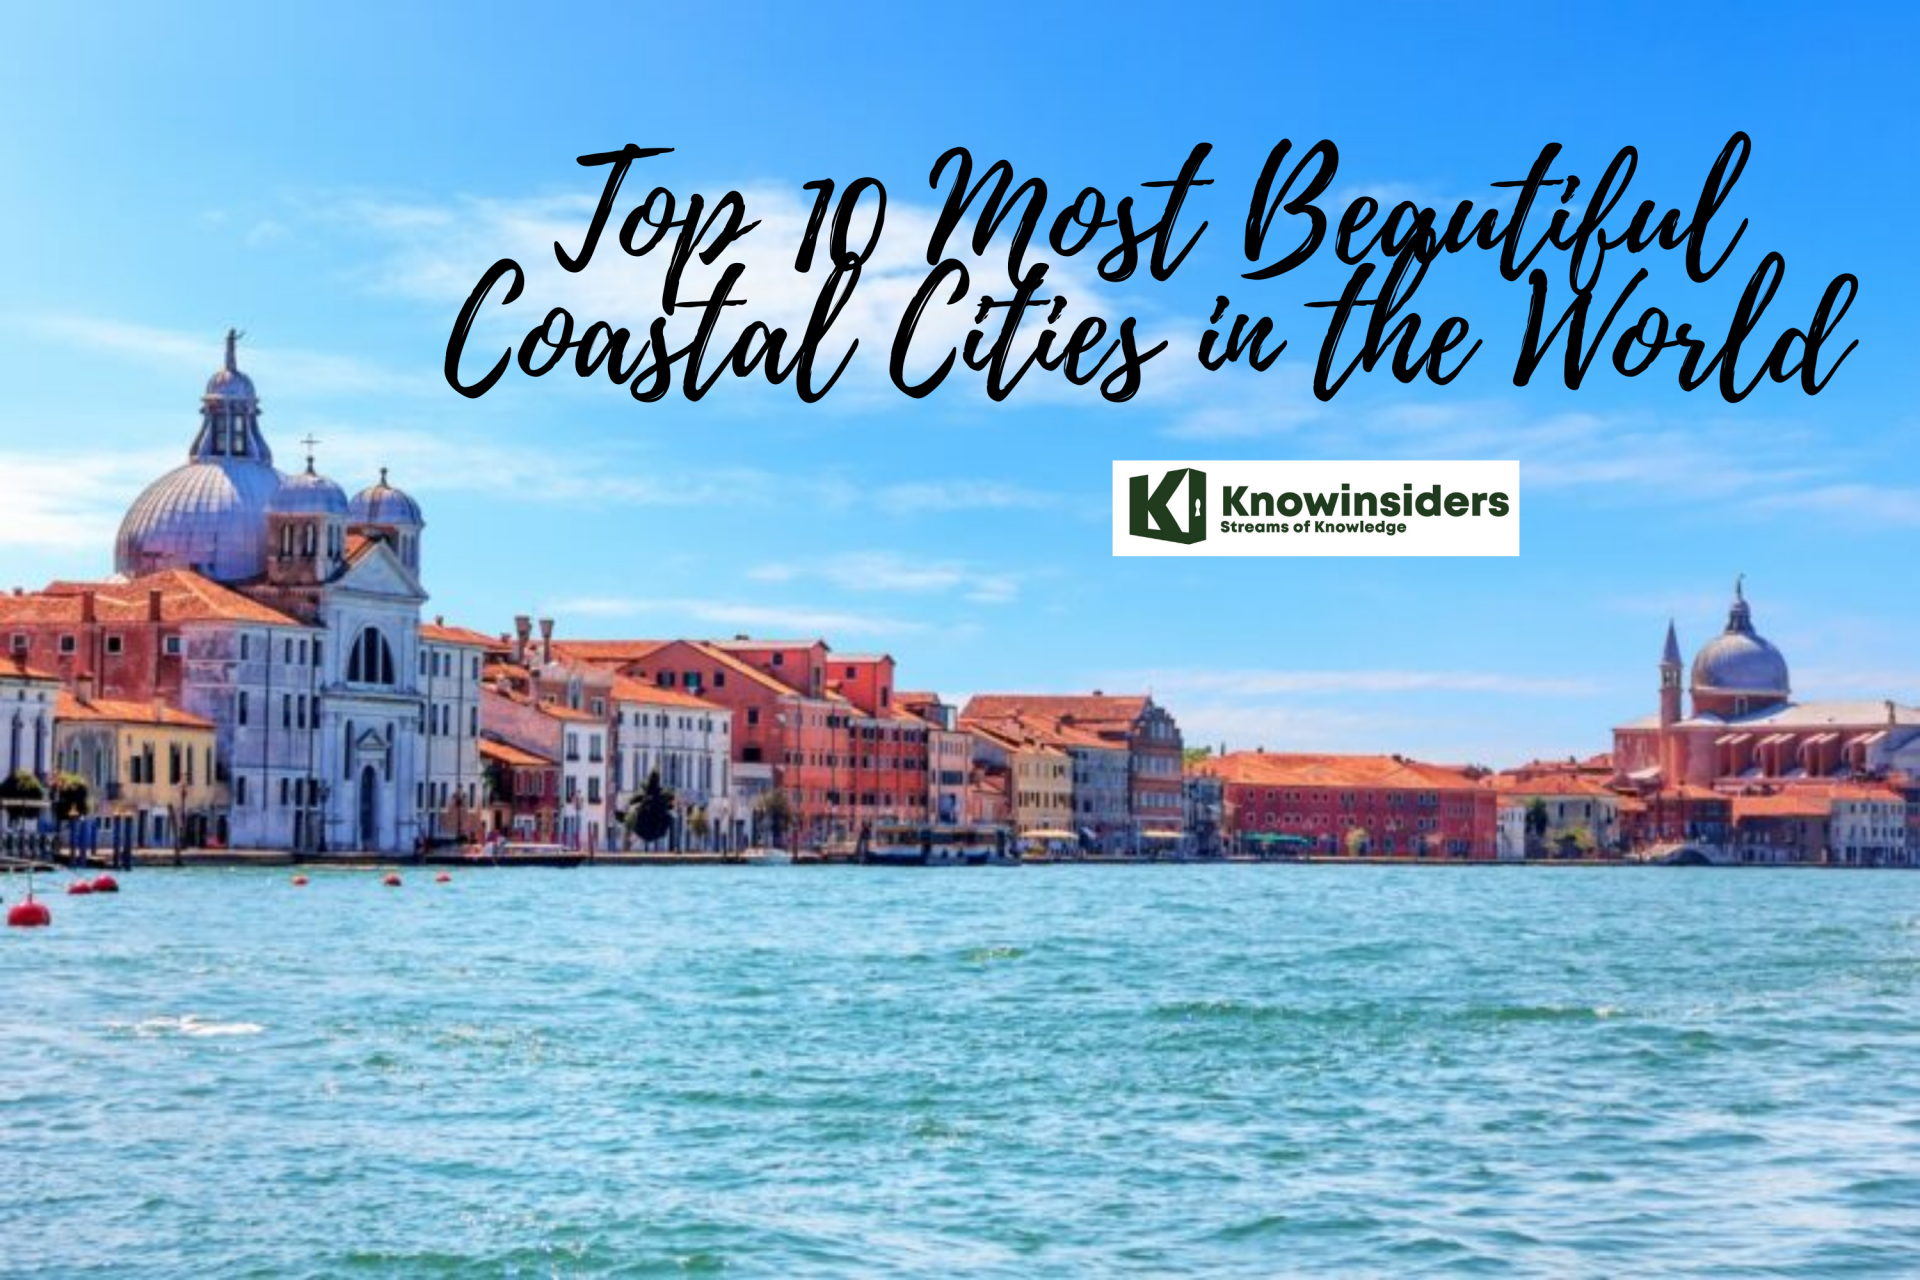 Top 10 Most Beautiful Coastal Cities in the World